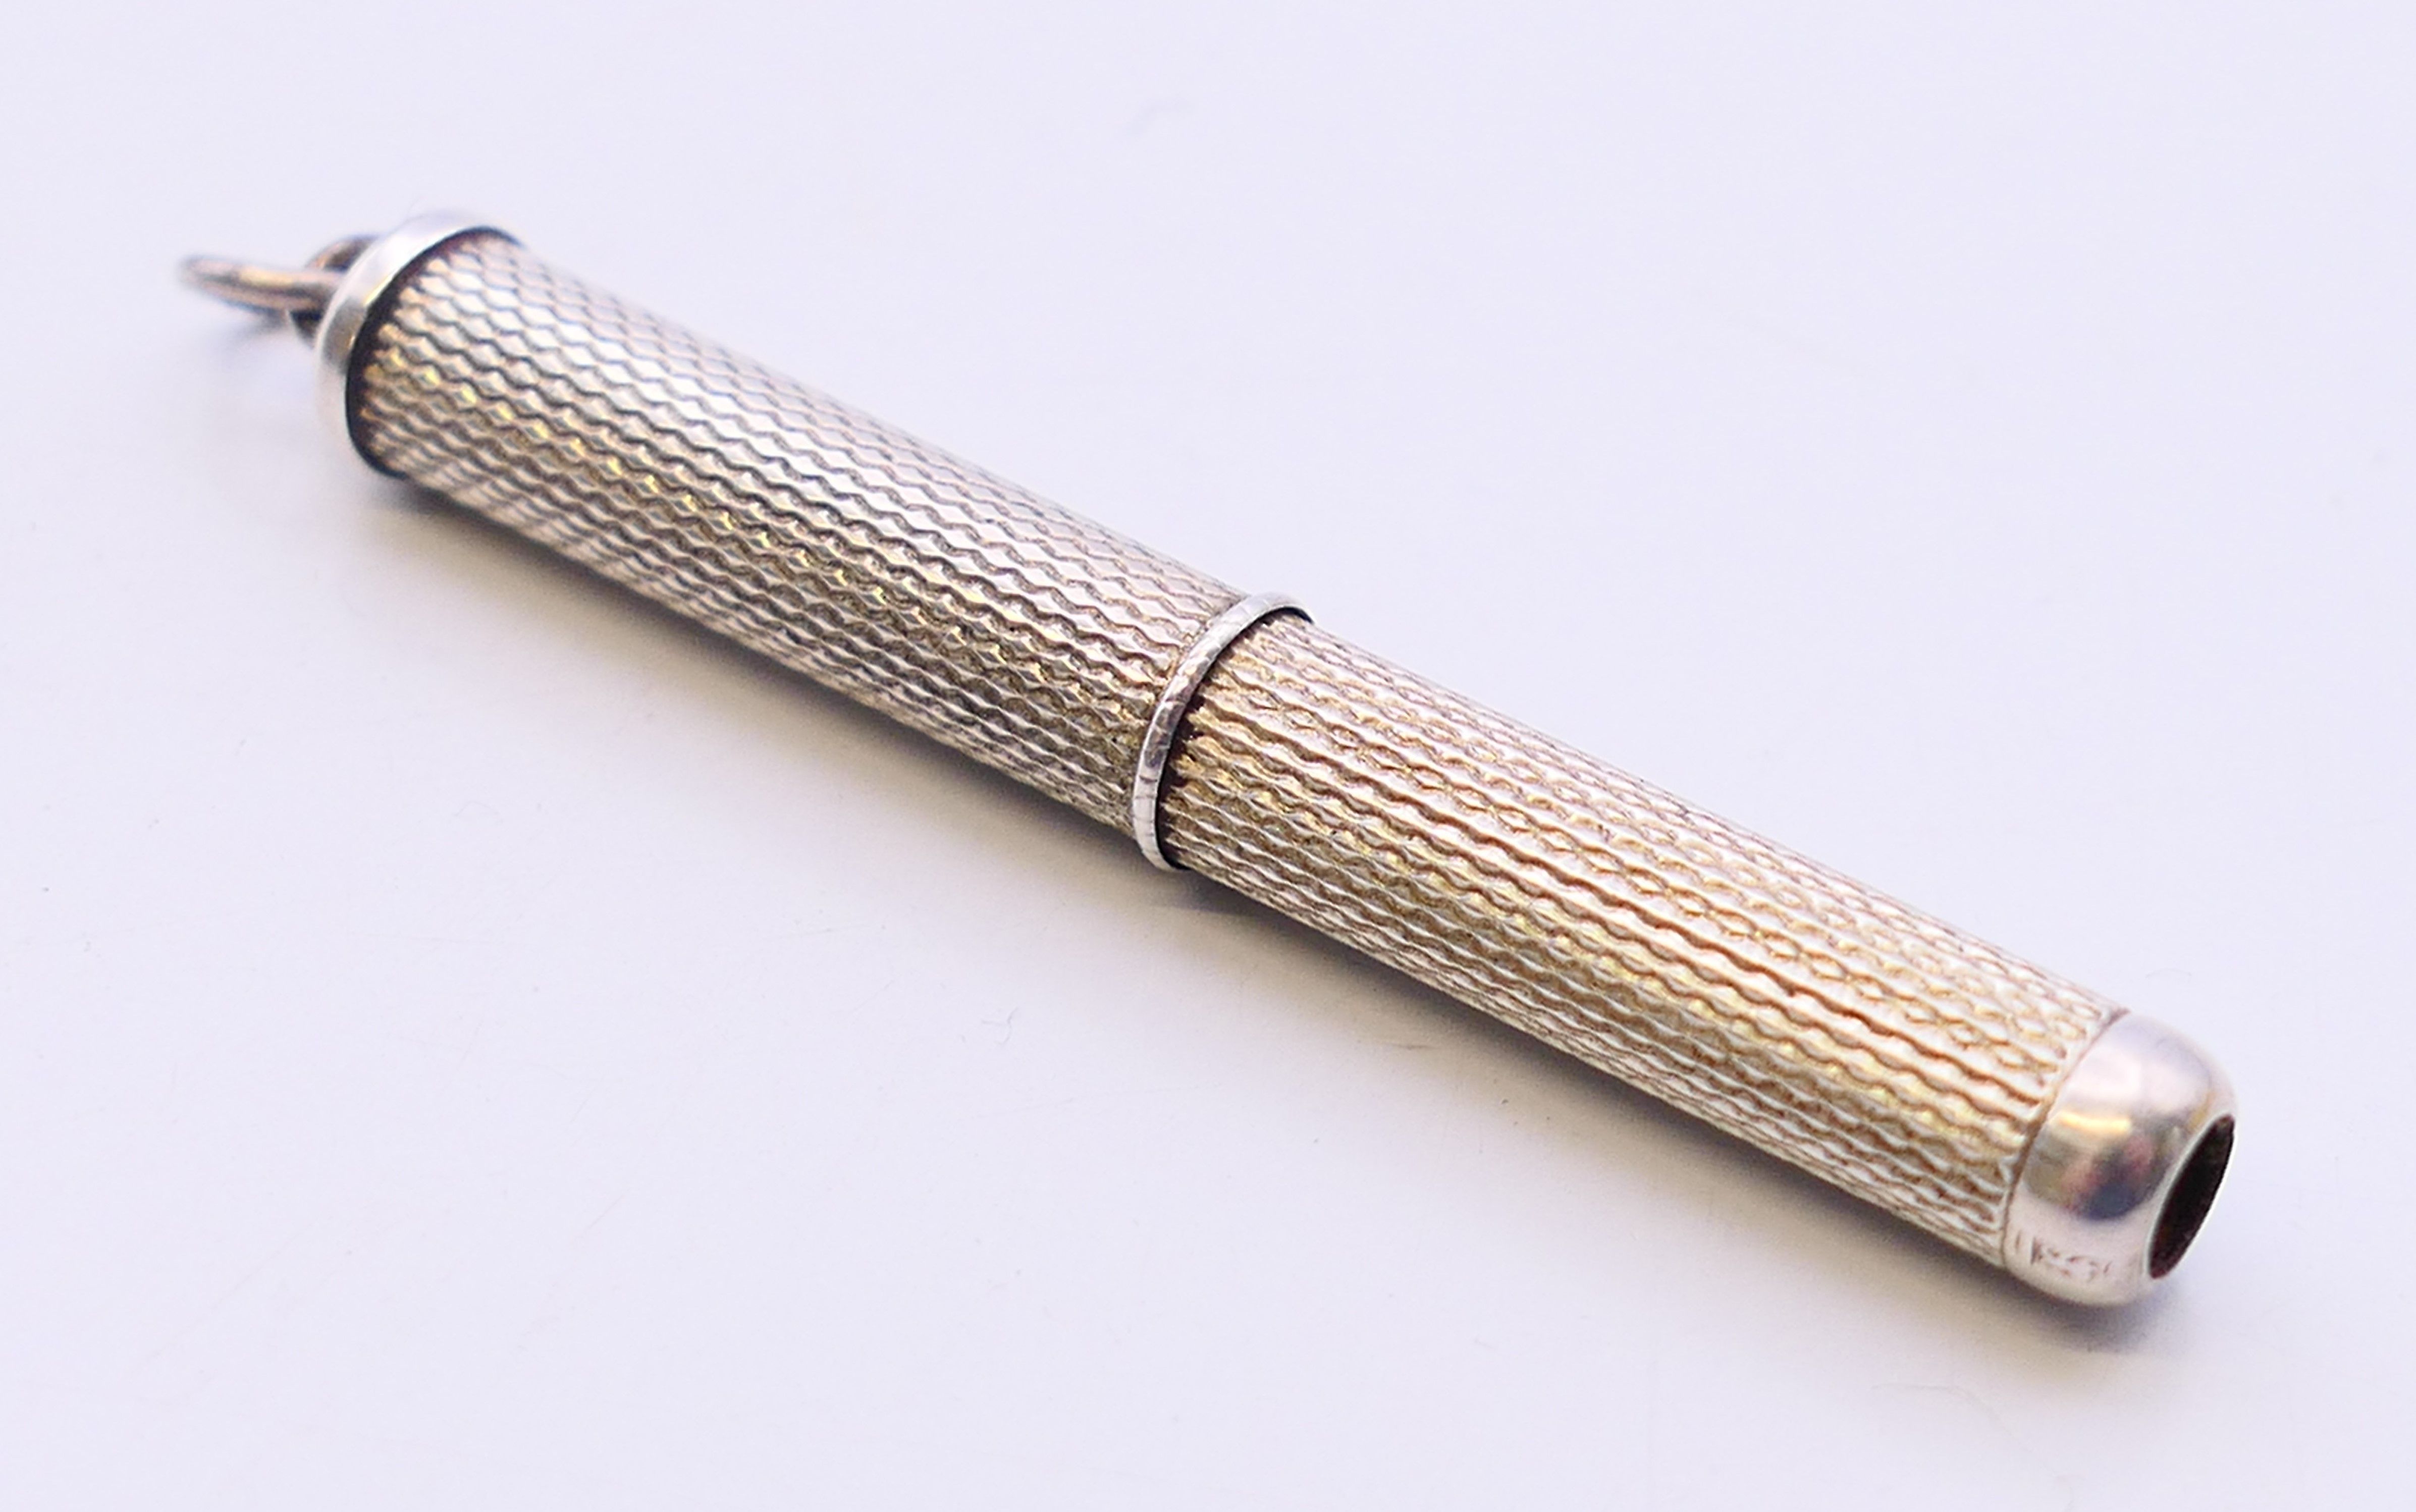 A silver toothpick. 4.5 cm long closed.